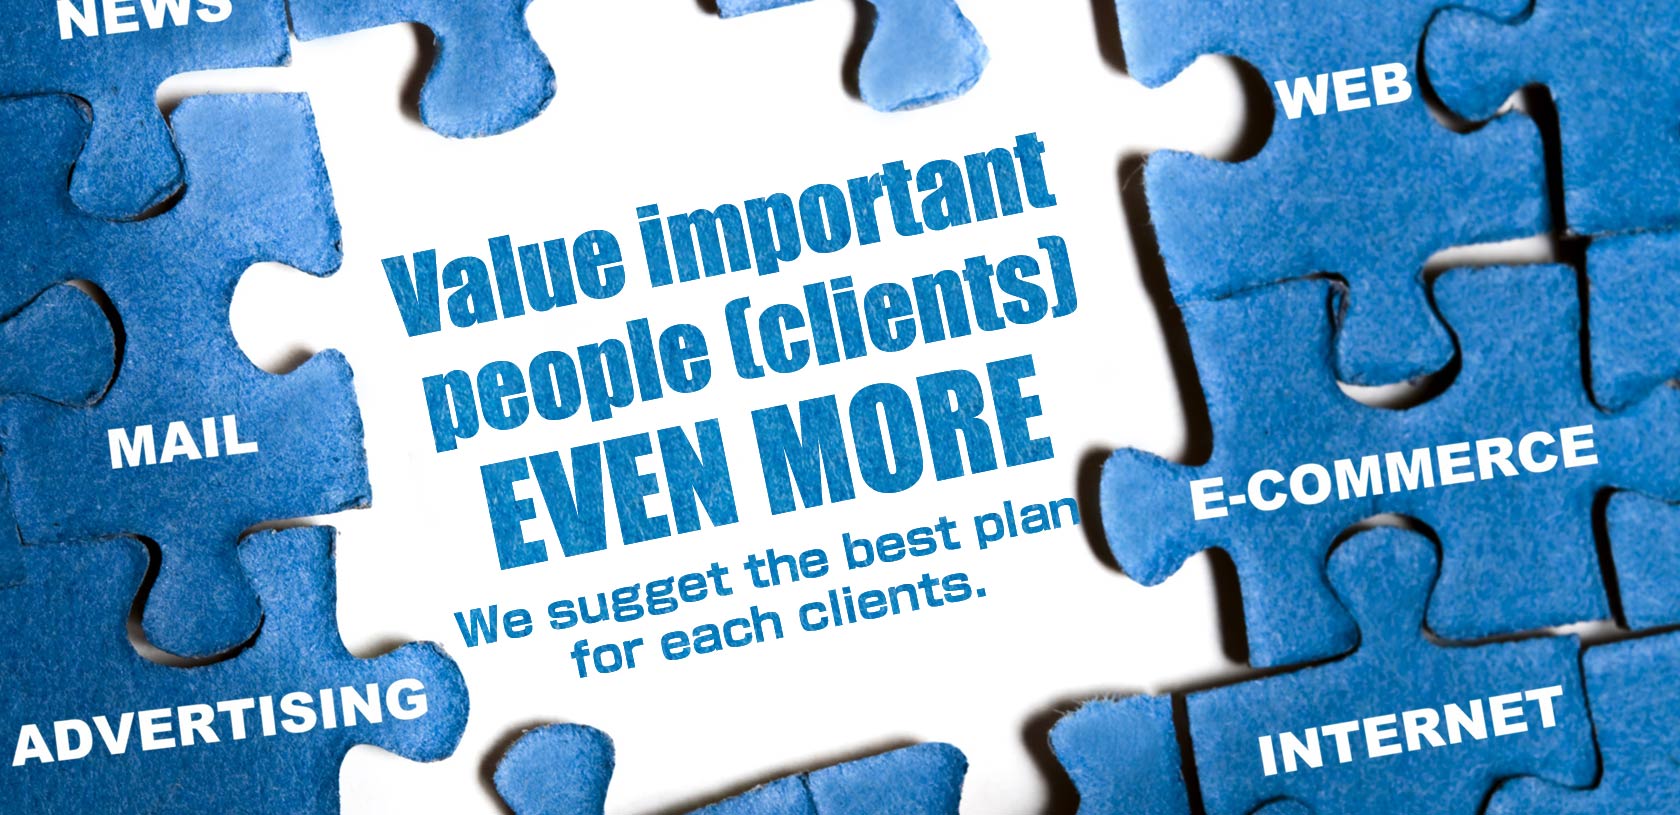 Value important people (clients) even more - We create the best plan for each clients.